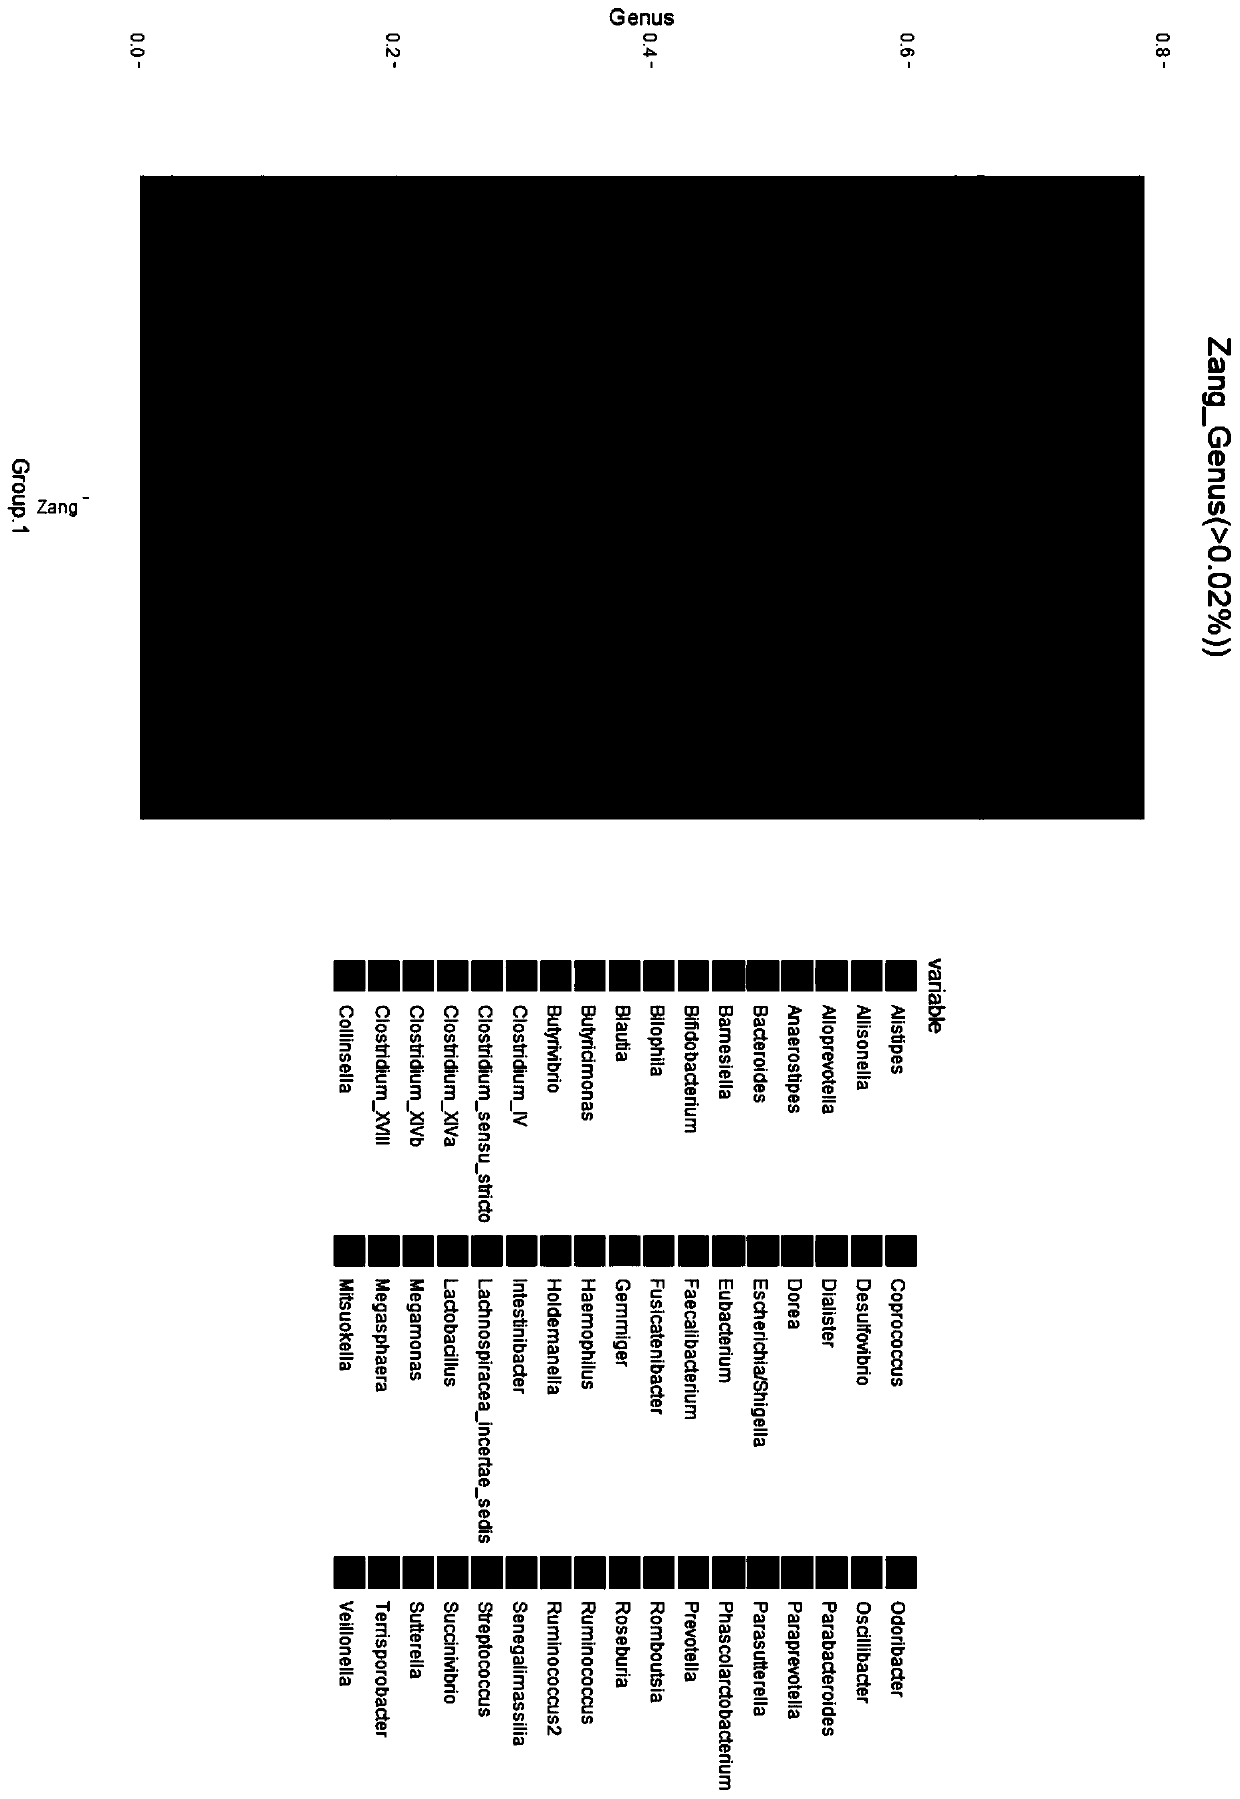 Application of alloprevotella in identifying and/or distinguishing individuals of different races